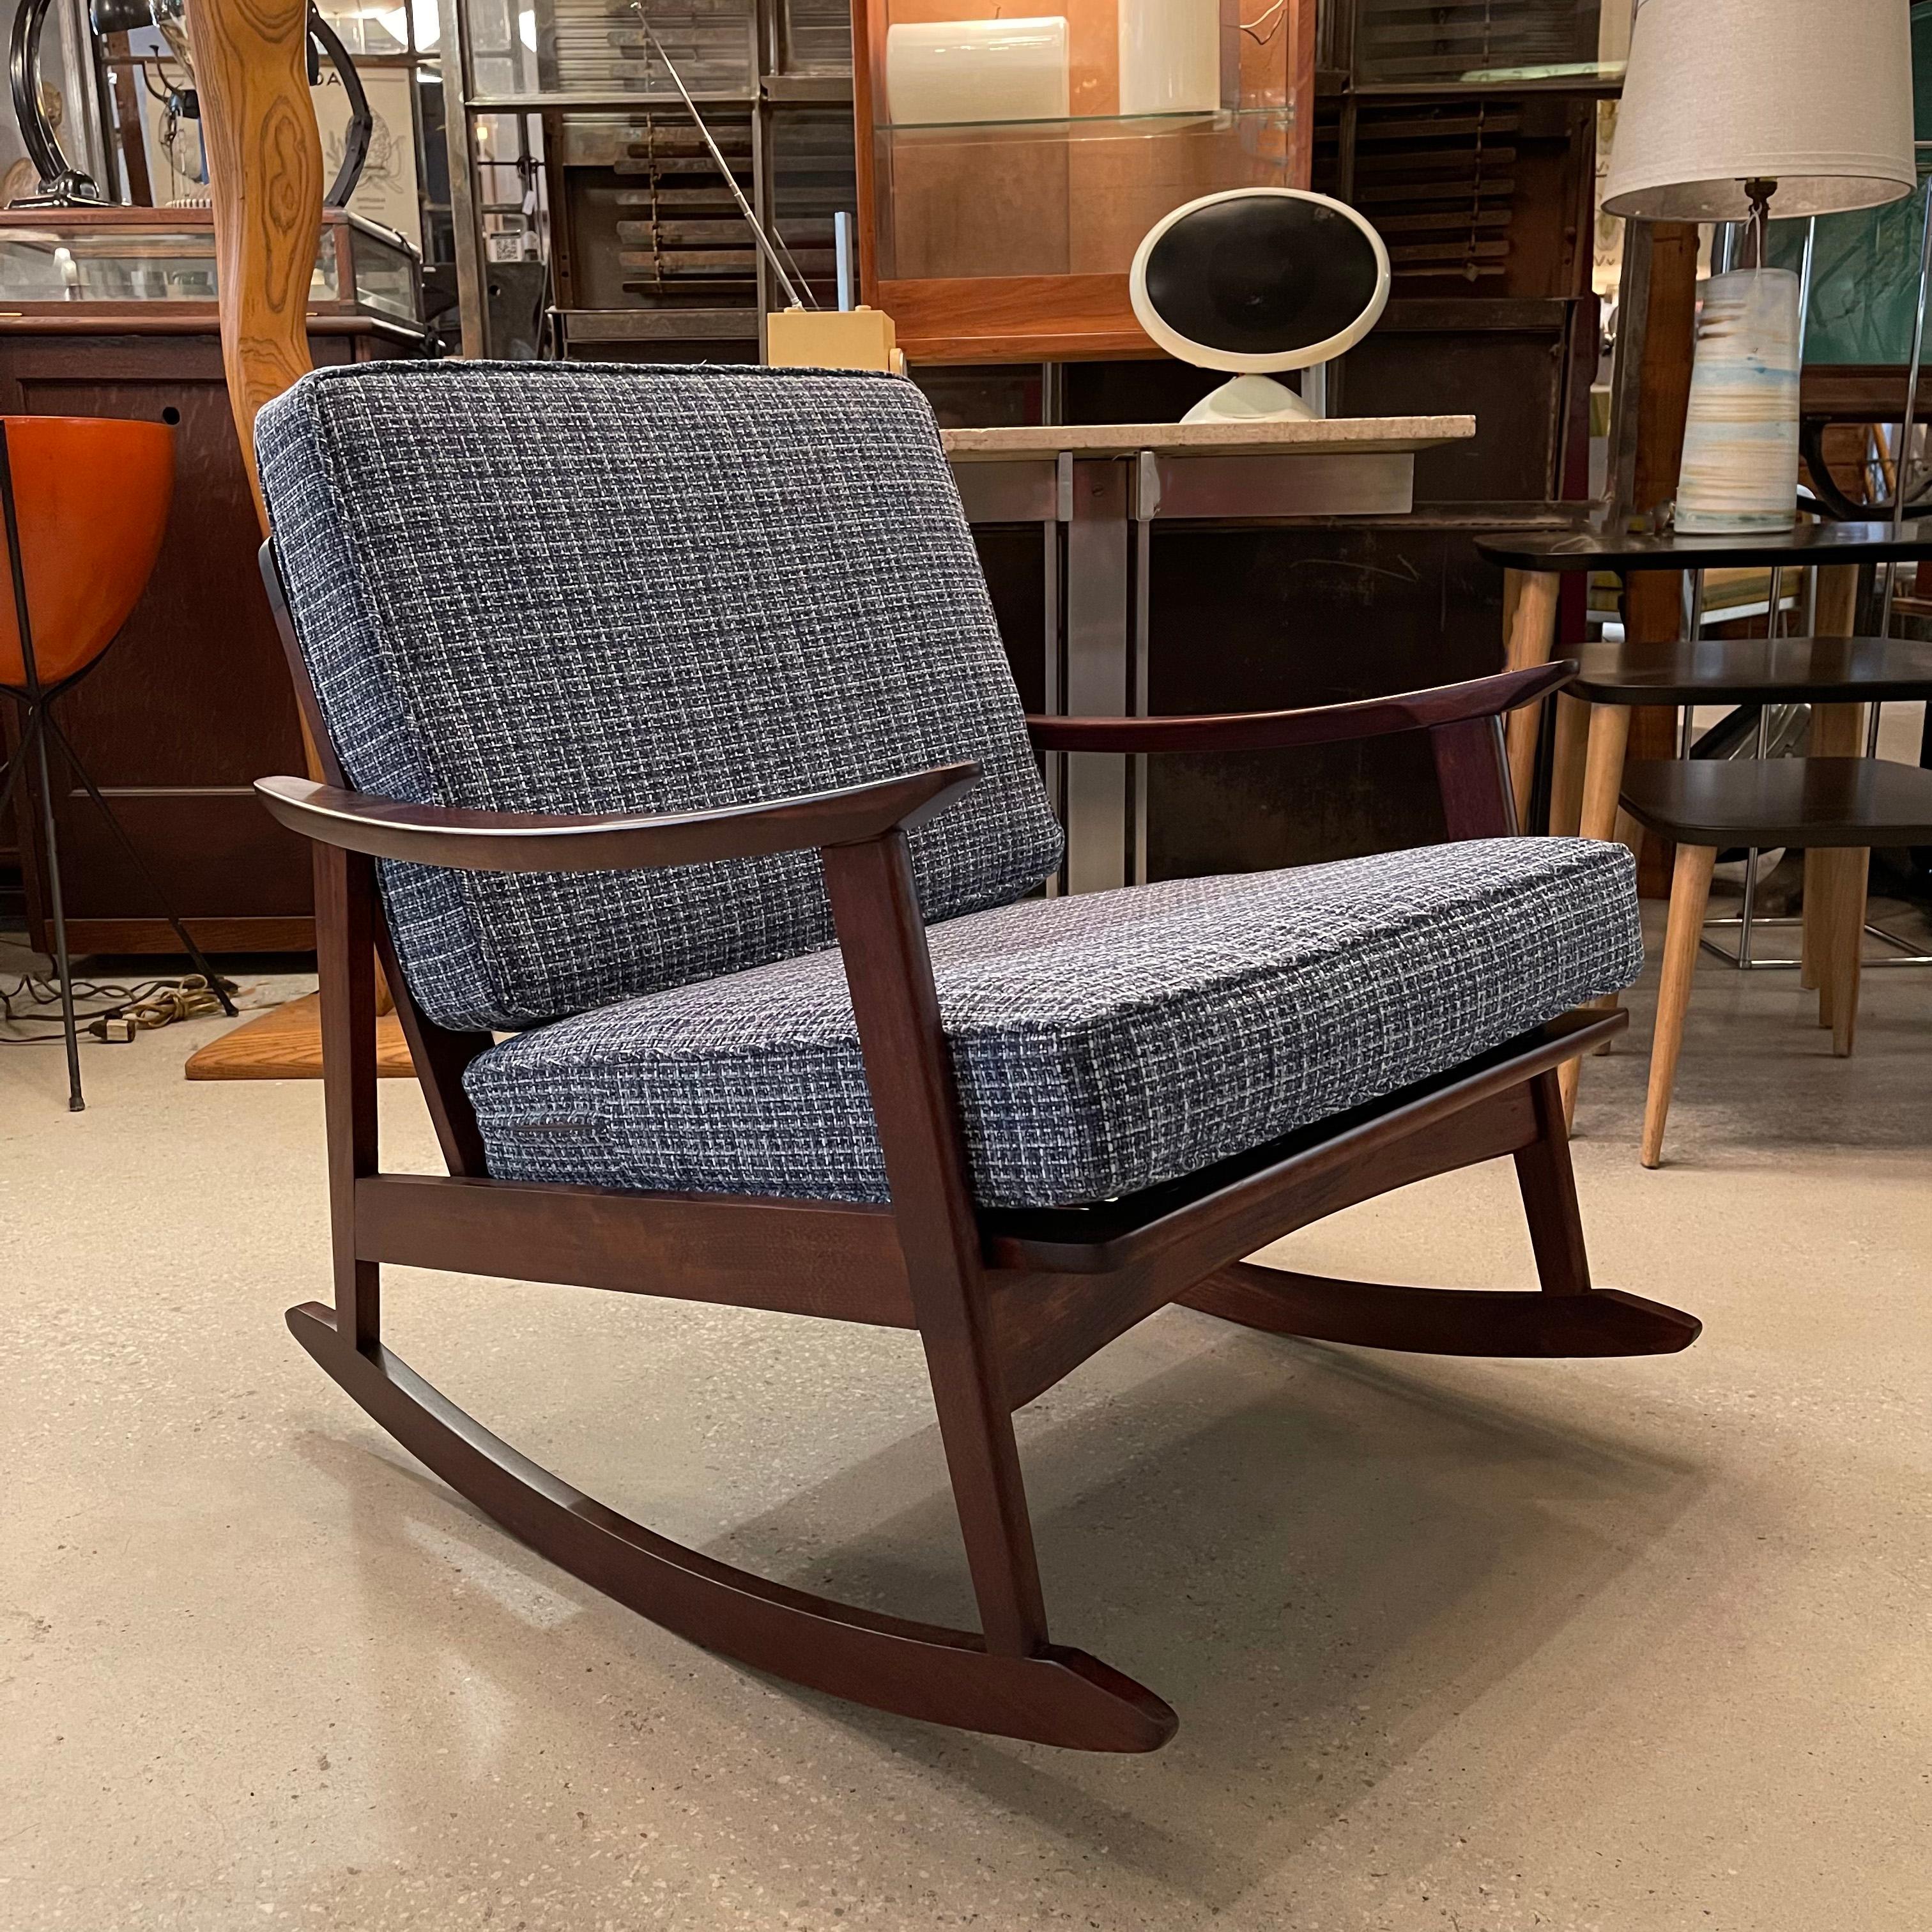 Danish modern rocking lounge chair features a sleek, teak frame with seat and back cushions upholstered in a cozy blue chenille tweed.